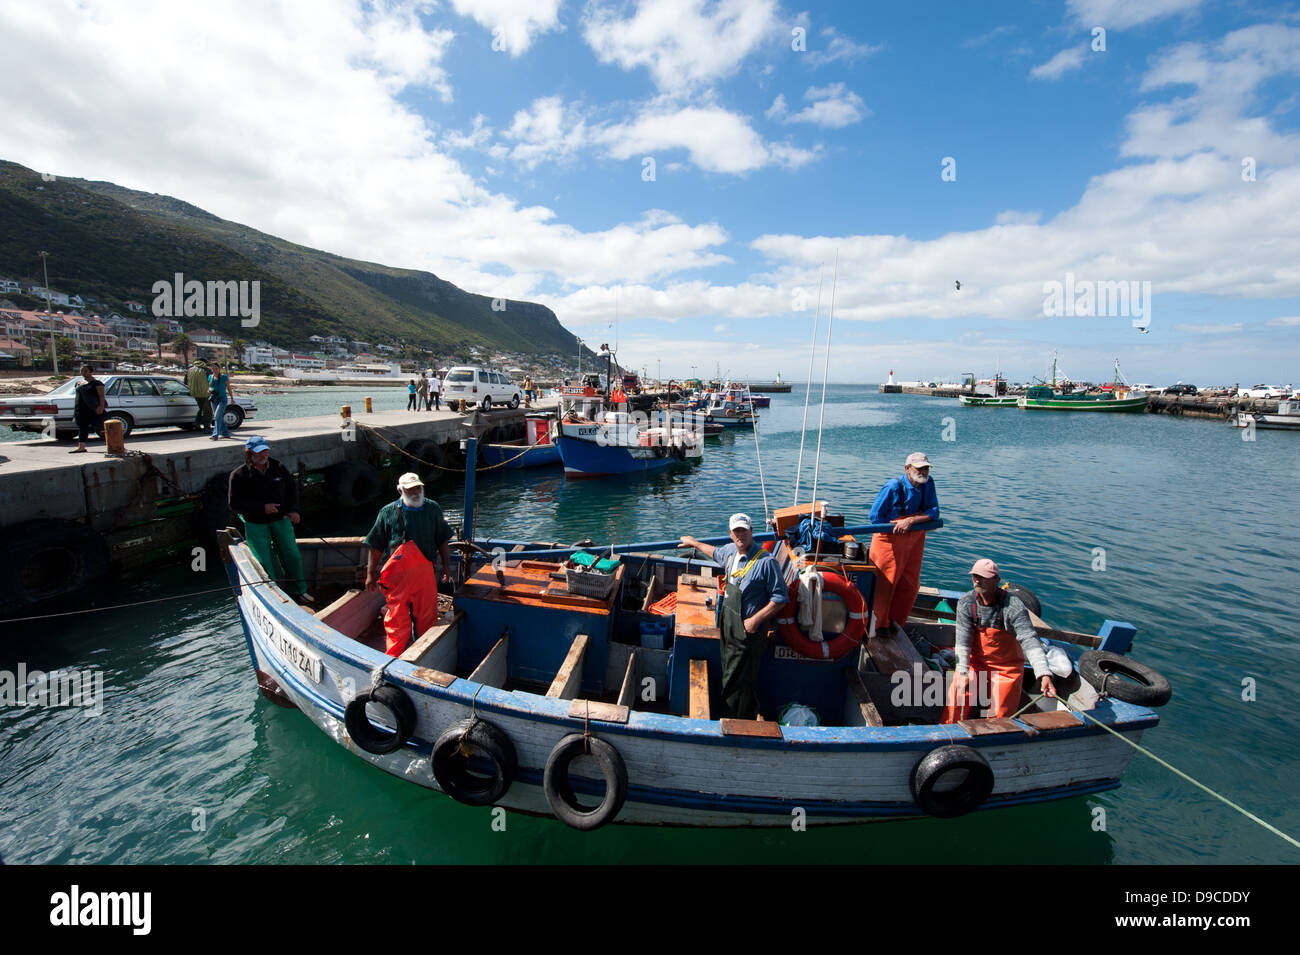 Fishing boat in the harbour, Kalk Bay, False Bay, South Africa Stock Photo